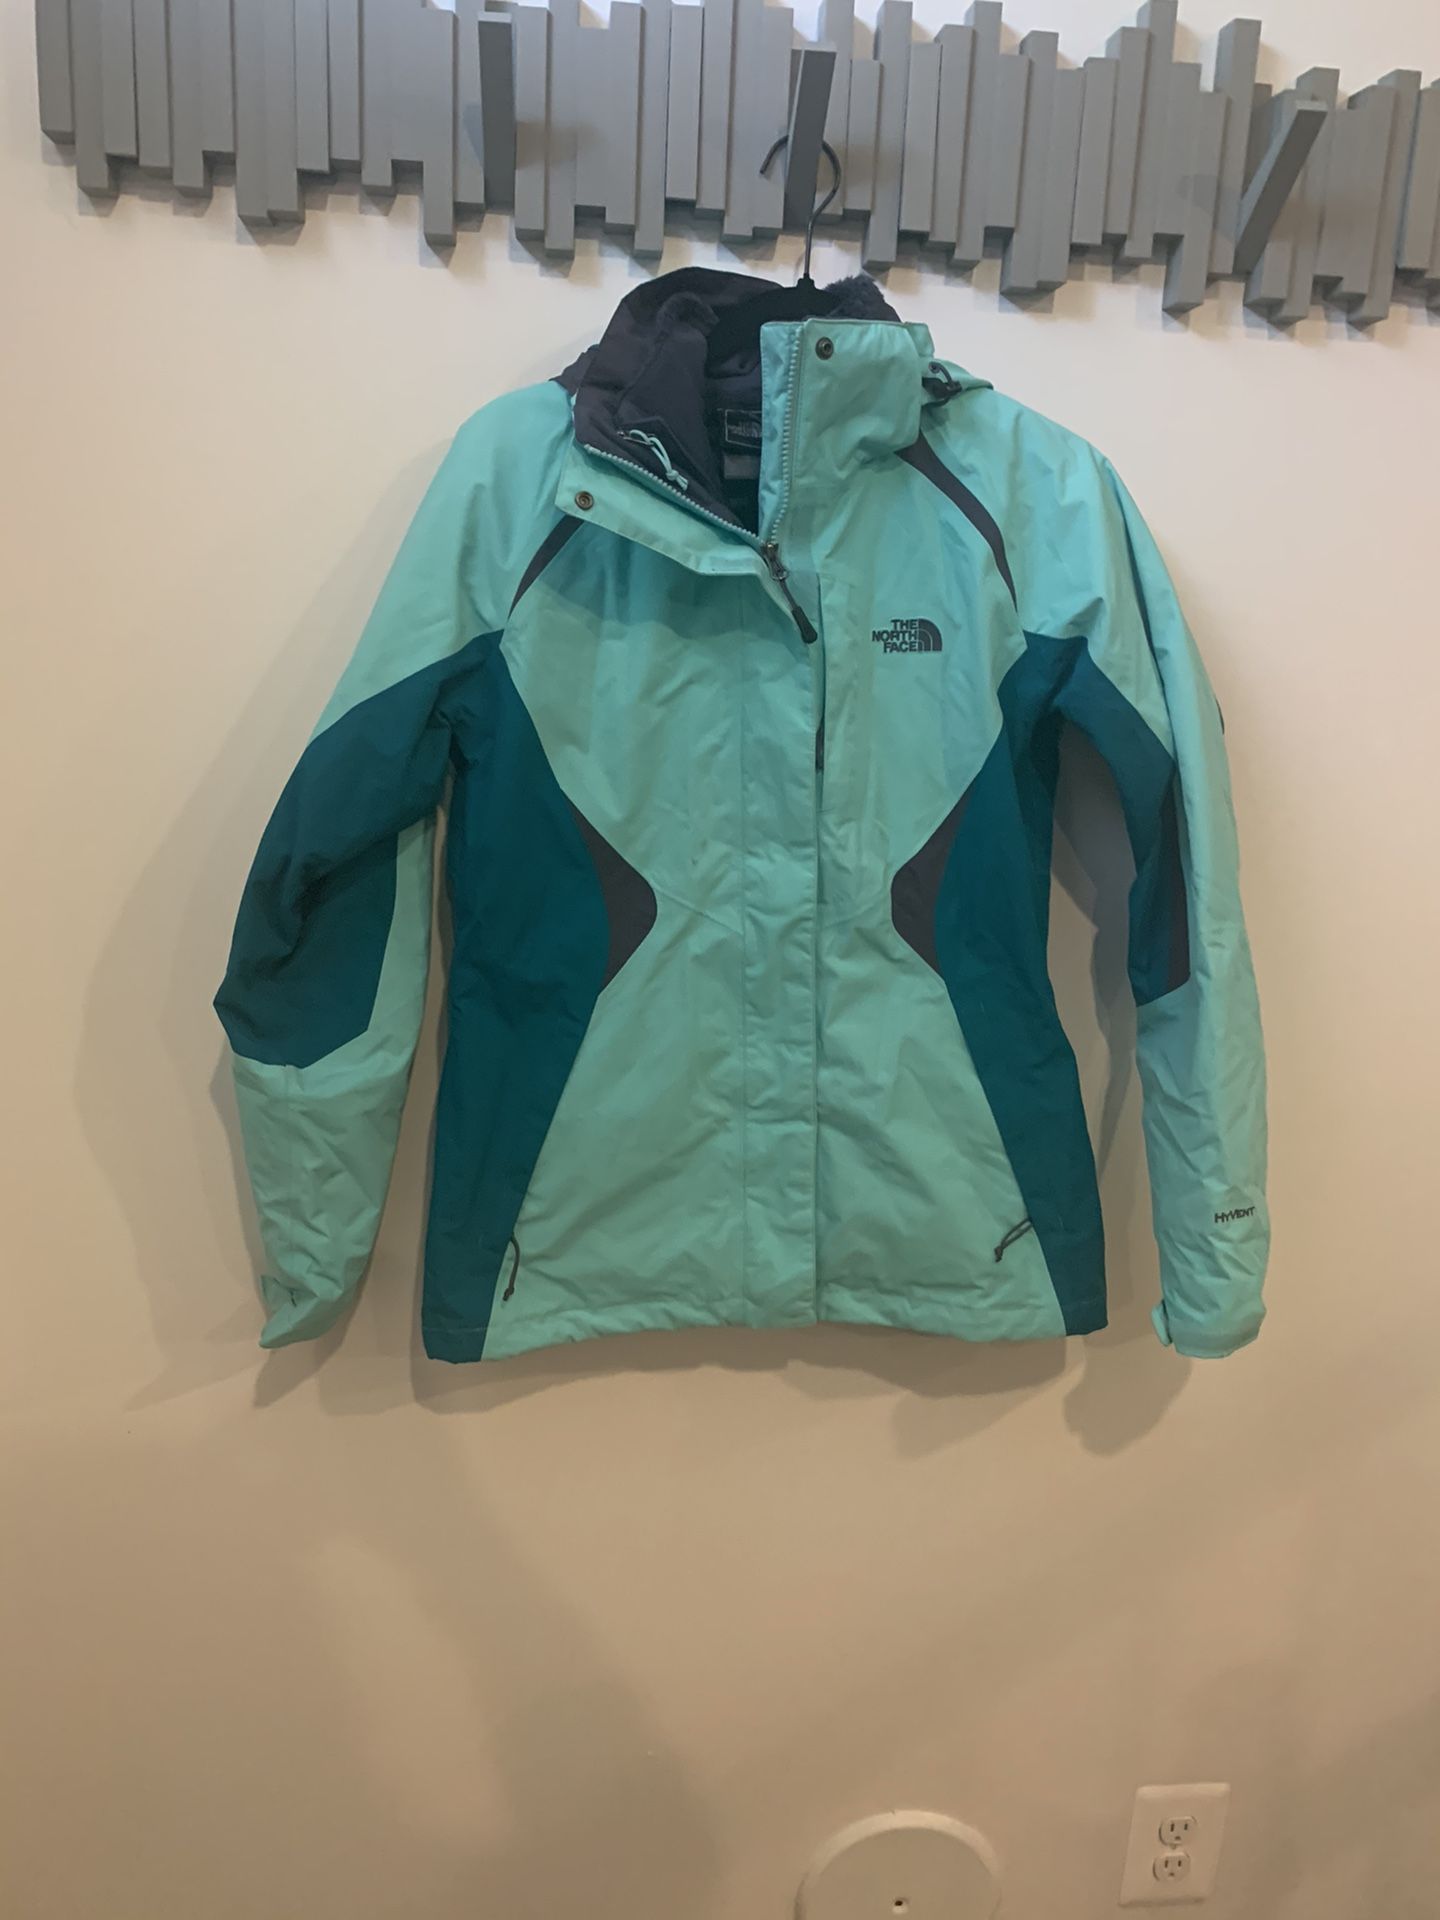 Ladies size small North Face 3-1 ski jacket